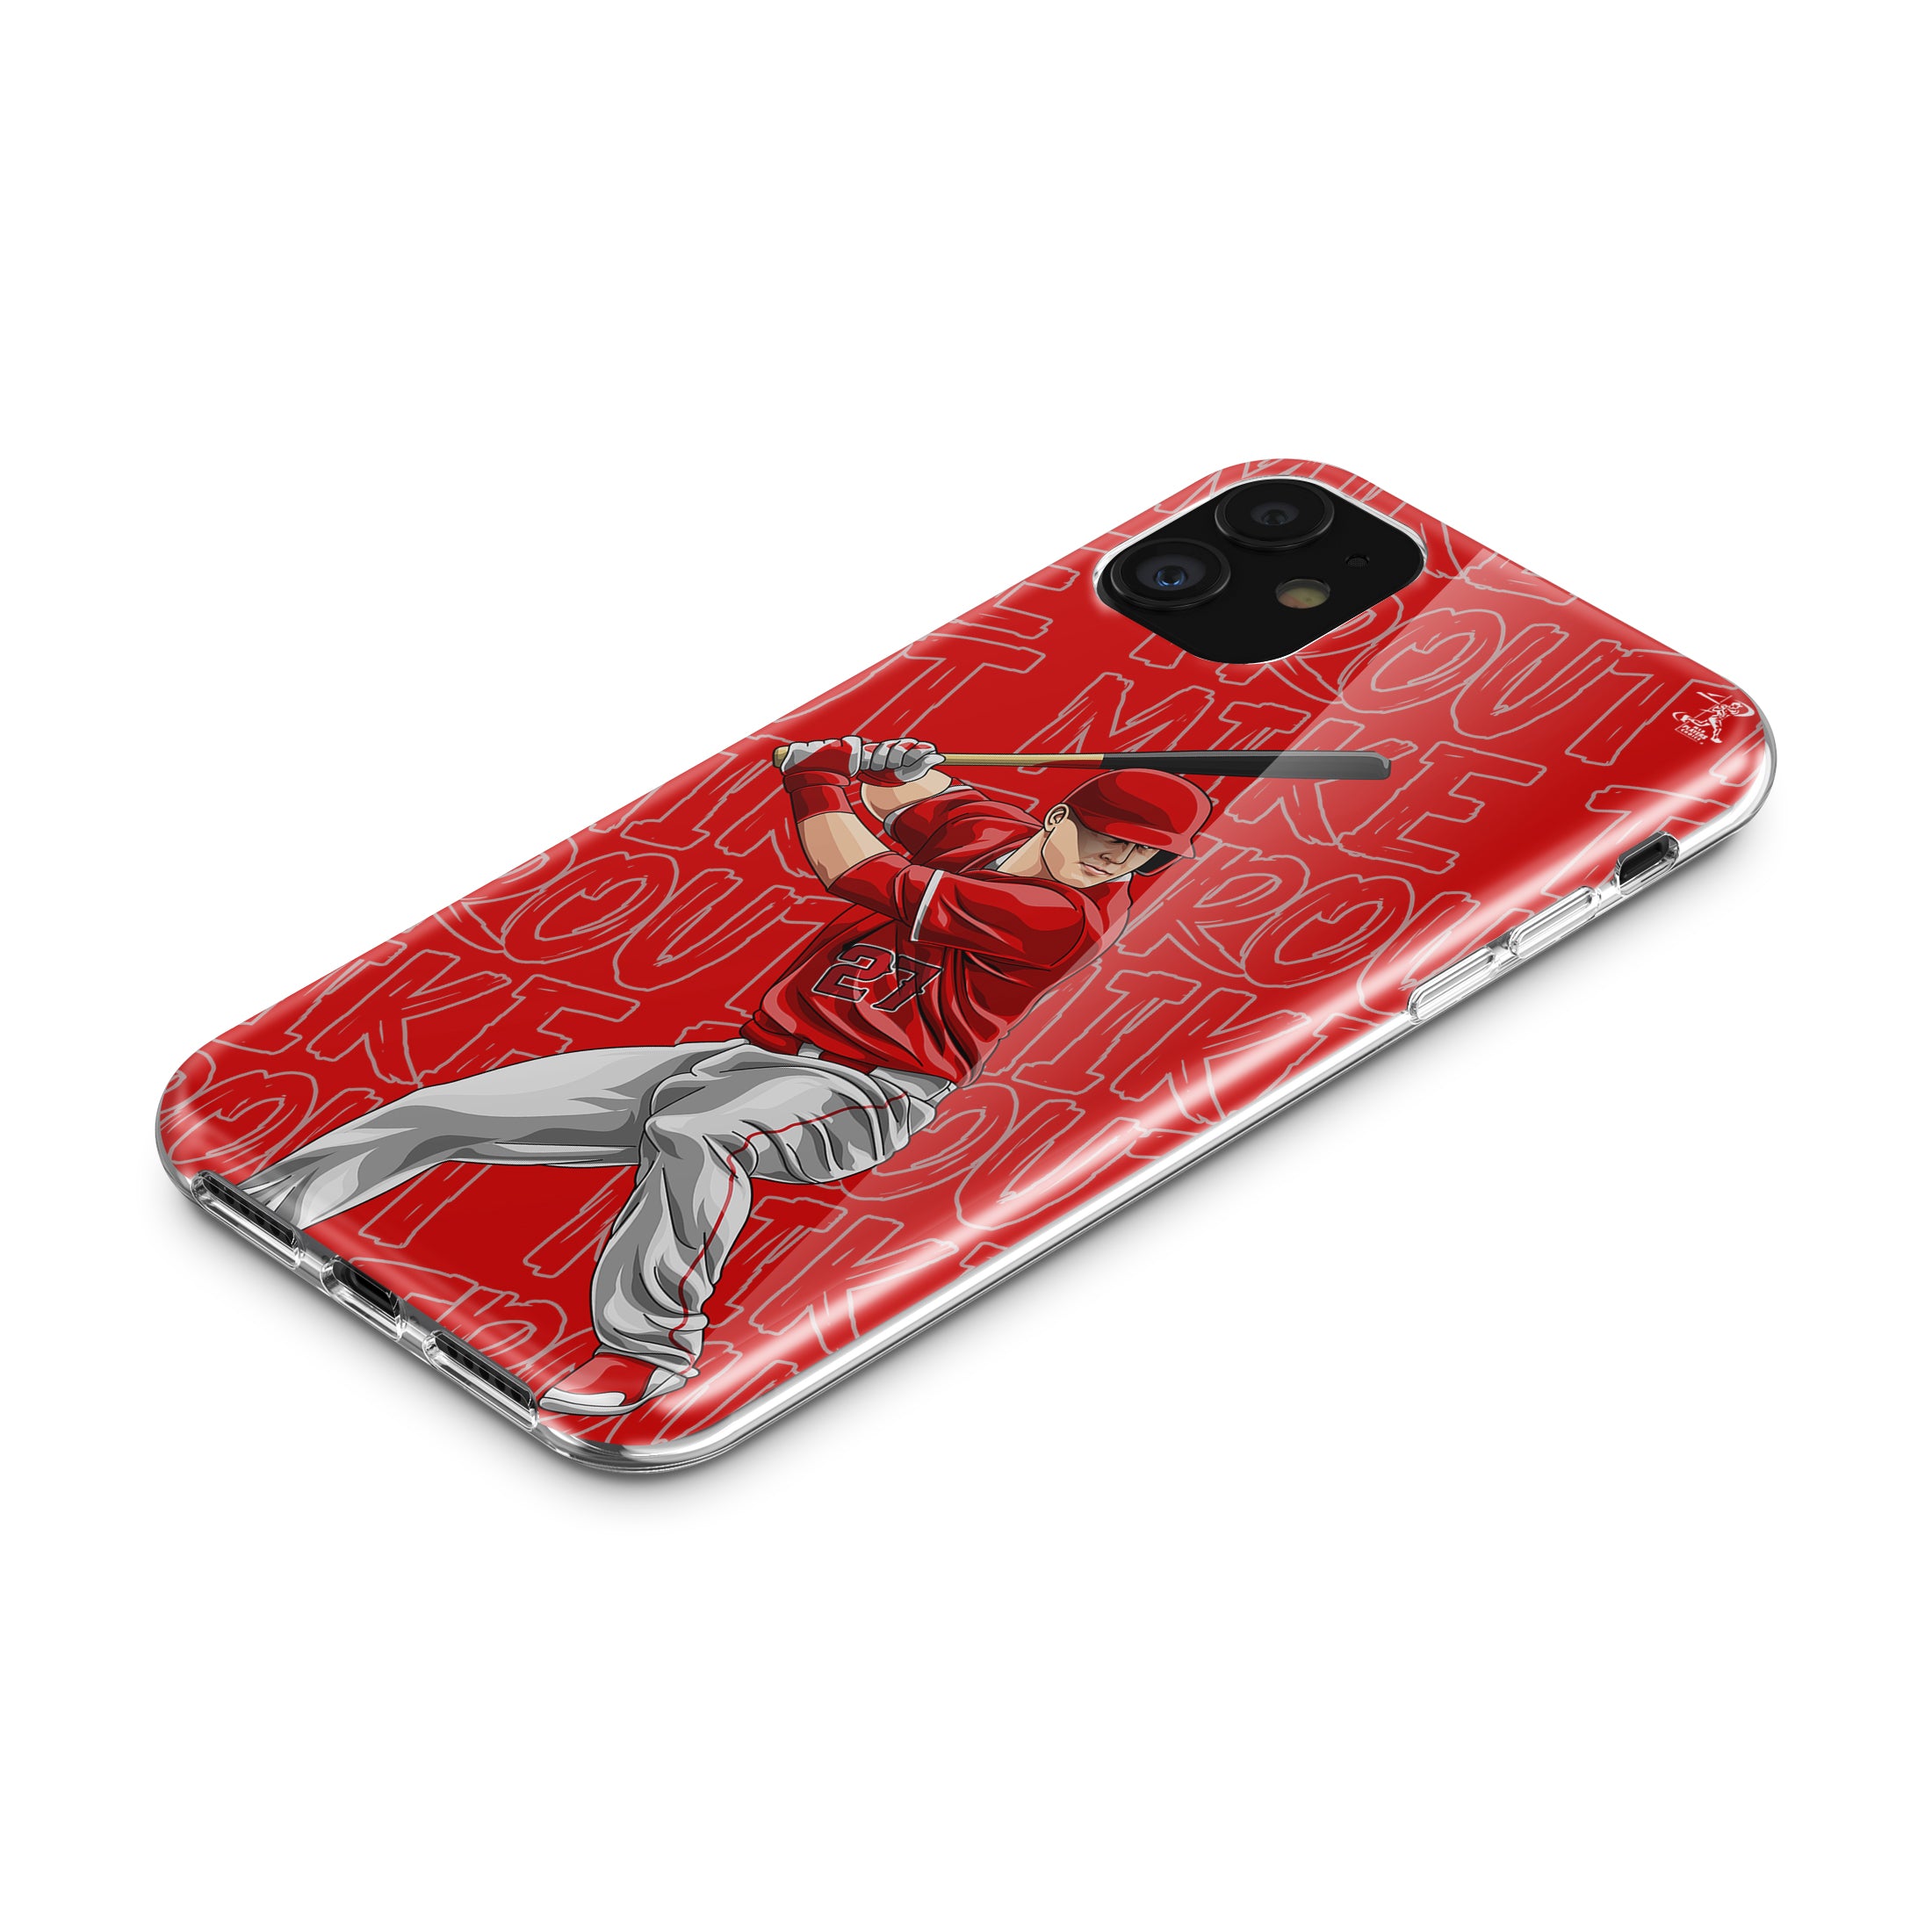 Trout Star Series 2.0 Case